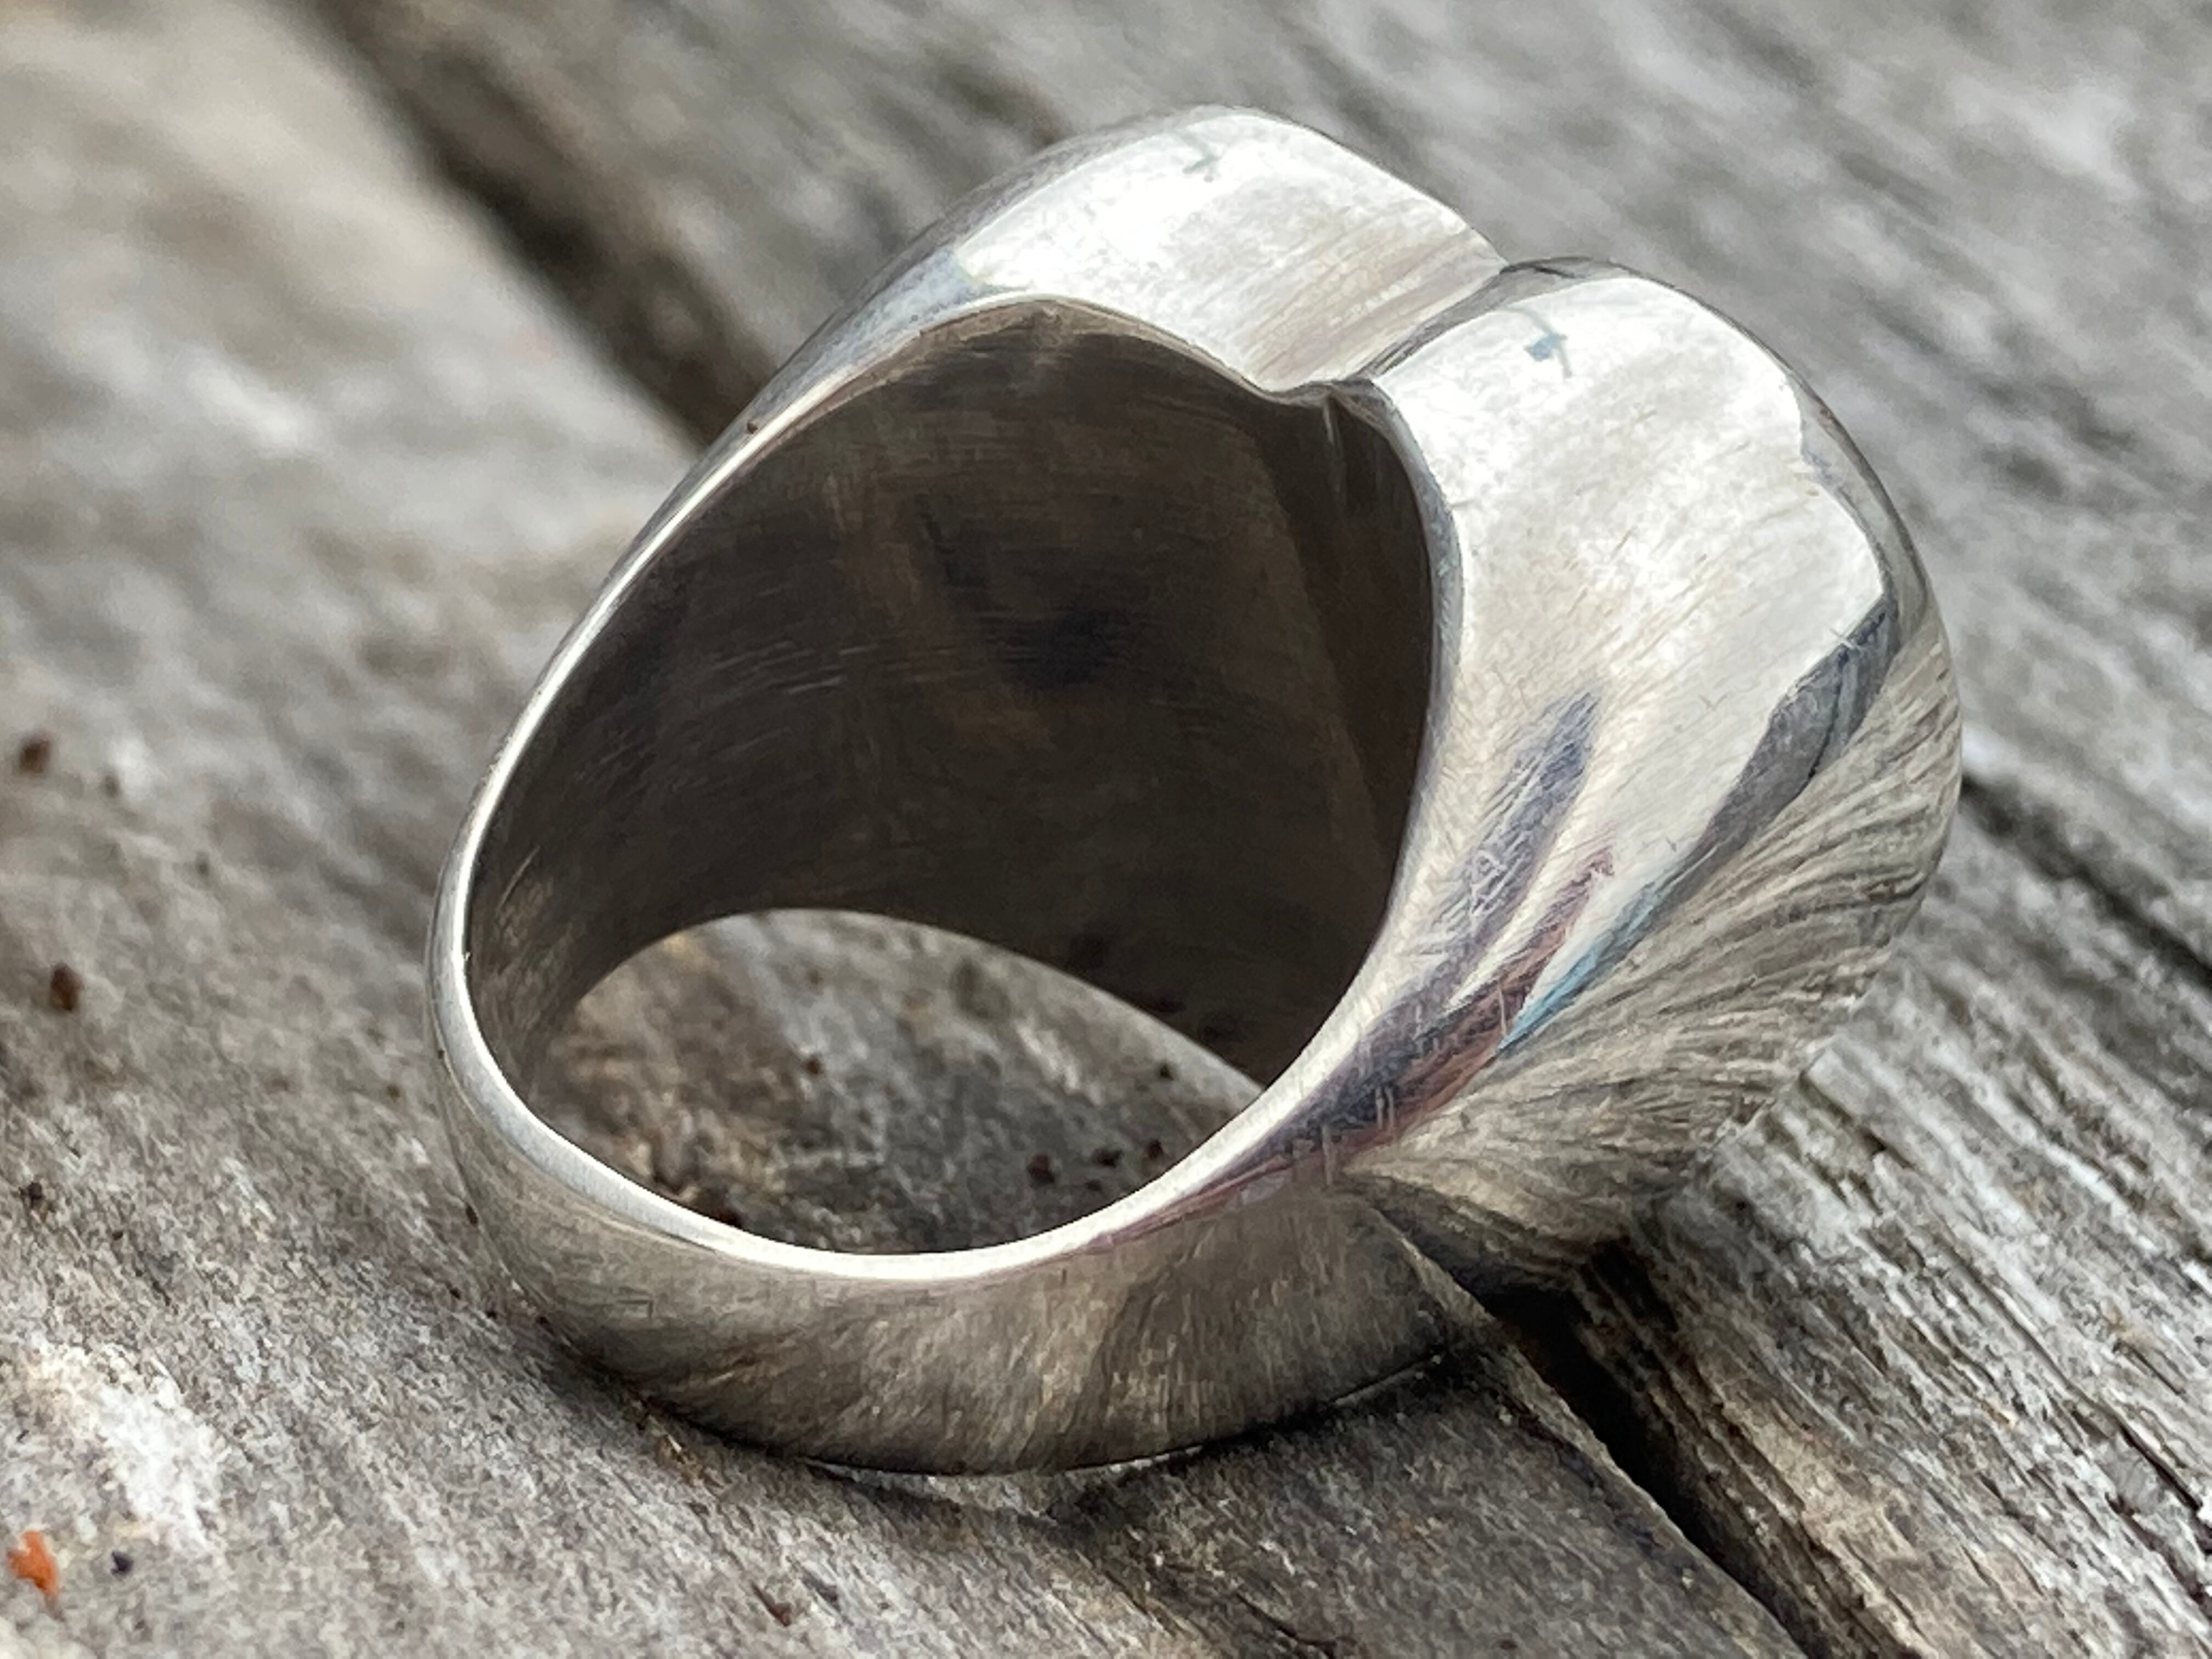 Carhartt heart change button silver ring | CEREAL powered by BASE